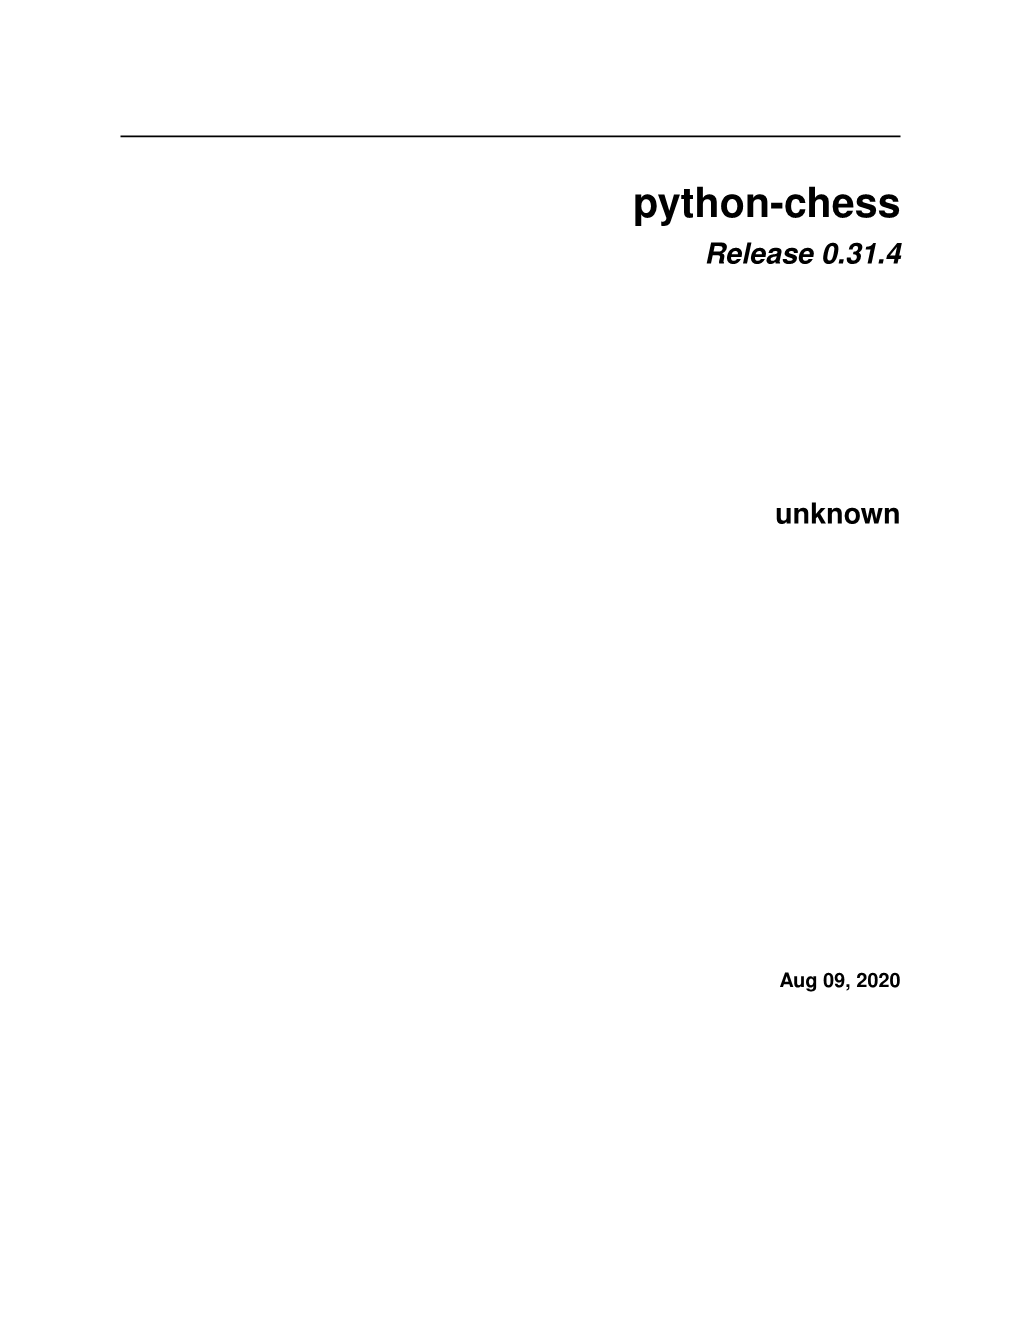 Python-Chess Release 0.31.4 Unknown